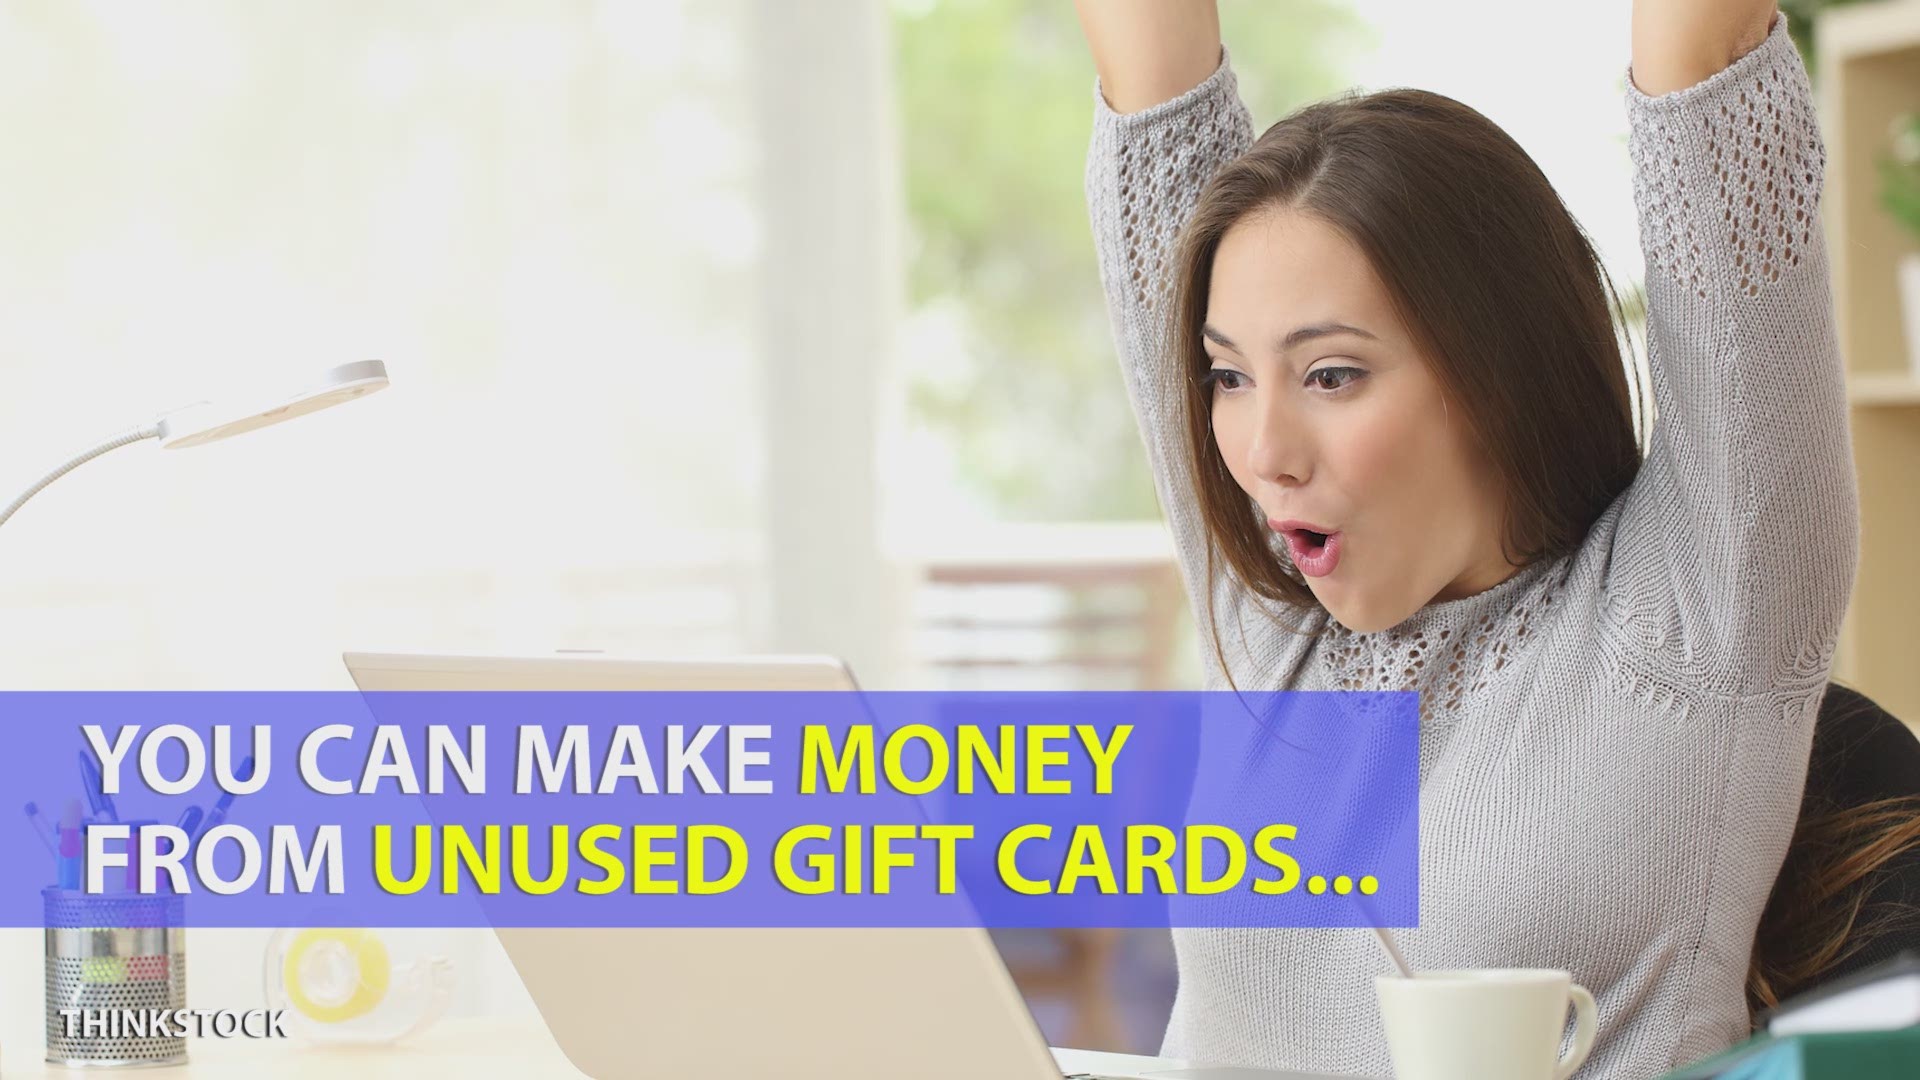 Learn more about how you can make money from your unused gift cards.